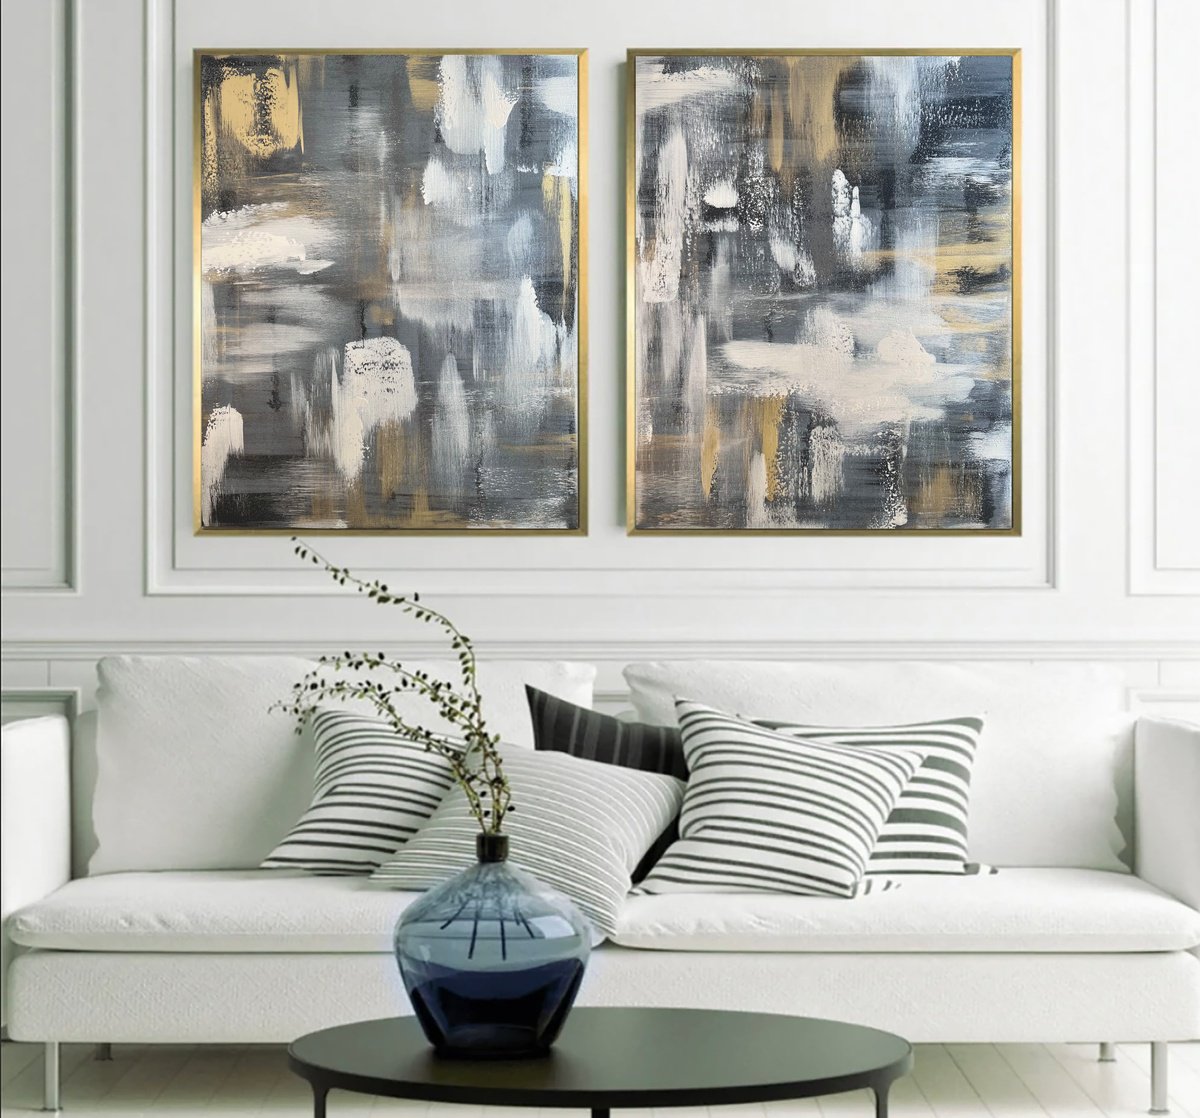 100x160cm Black gold silver abstract painting. Mother-of-pearl luxury 2 set/ by Marina Skromova